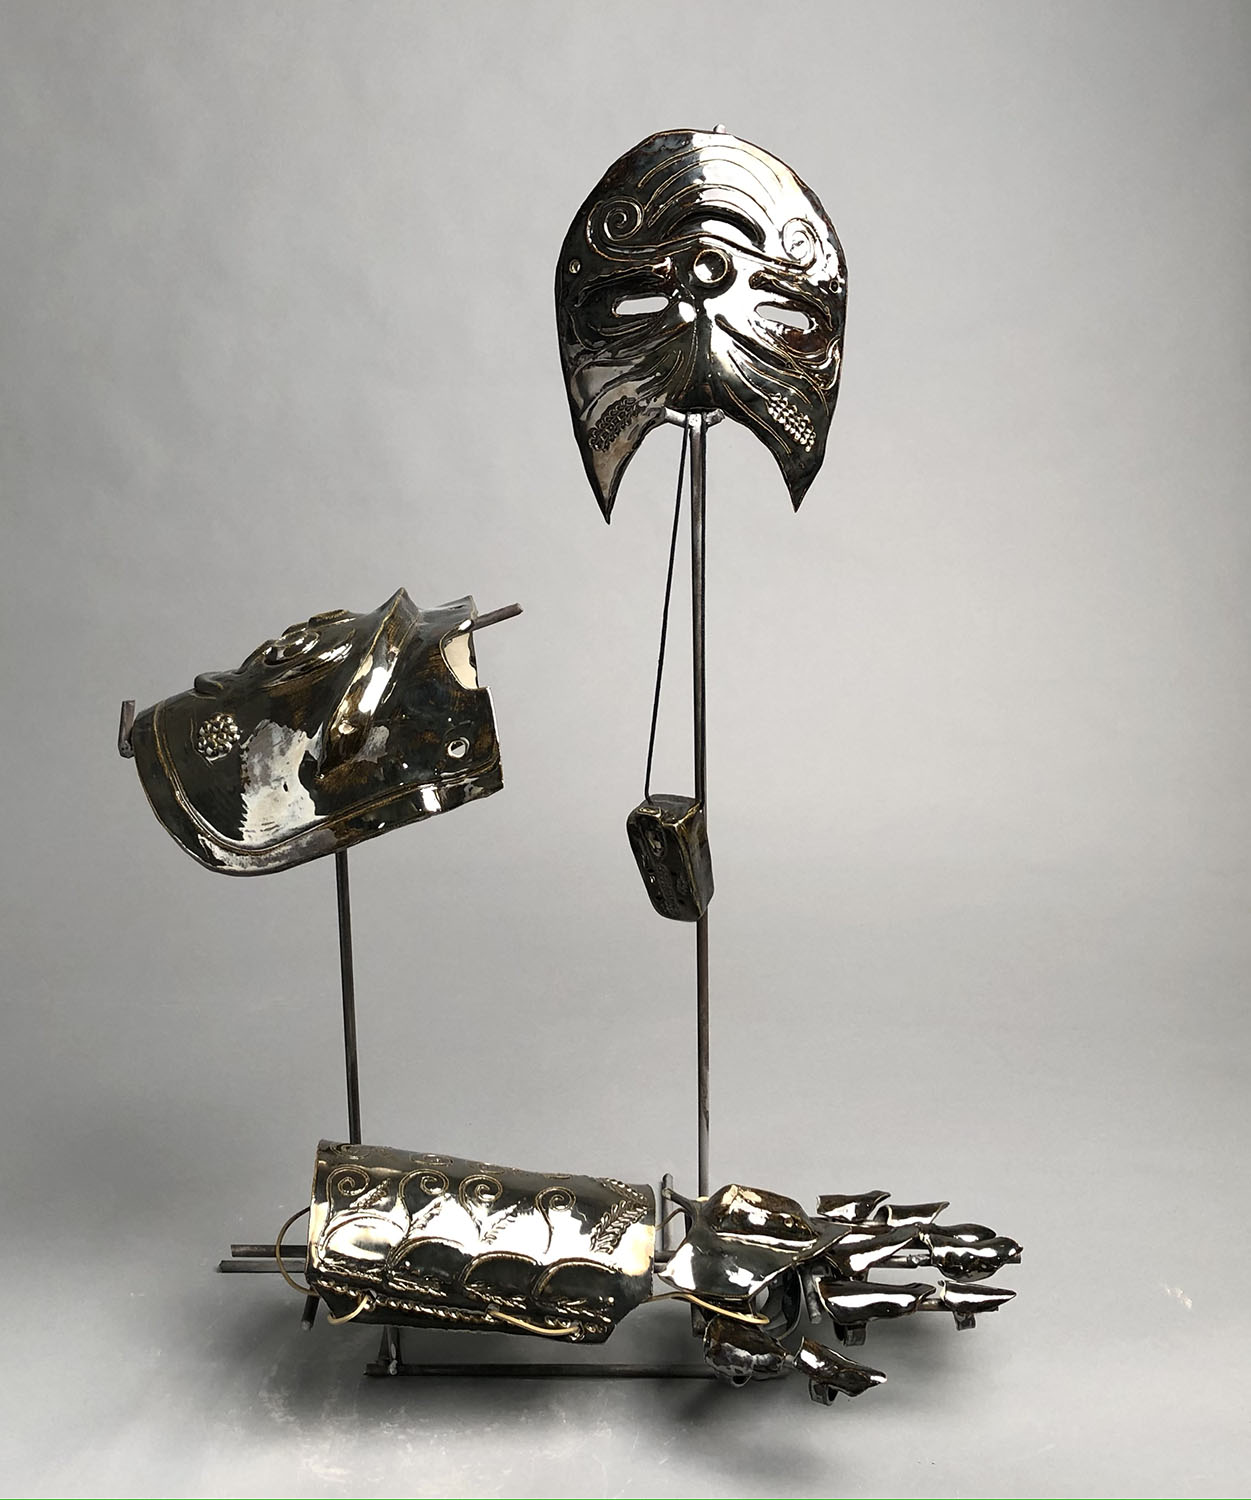 Metal frame supporting ceramic armor pieces with head, shoulder, arm and hand piece with metallic glaze, engravings, and designs. 